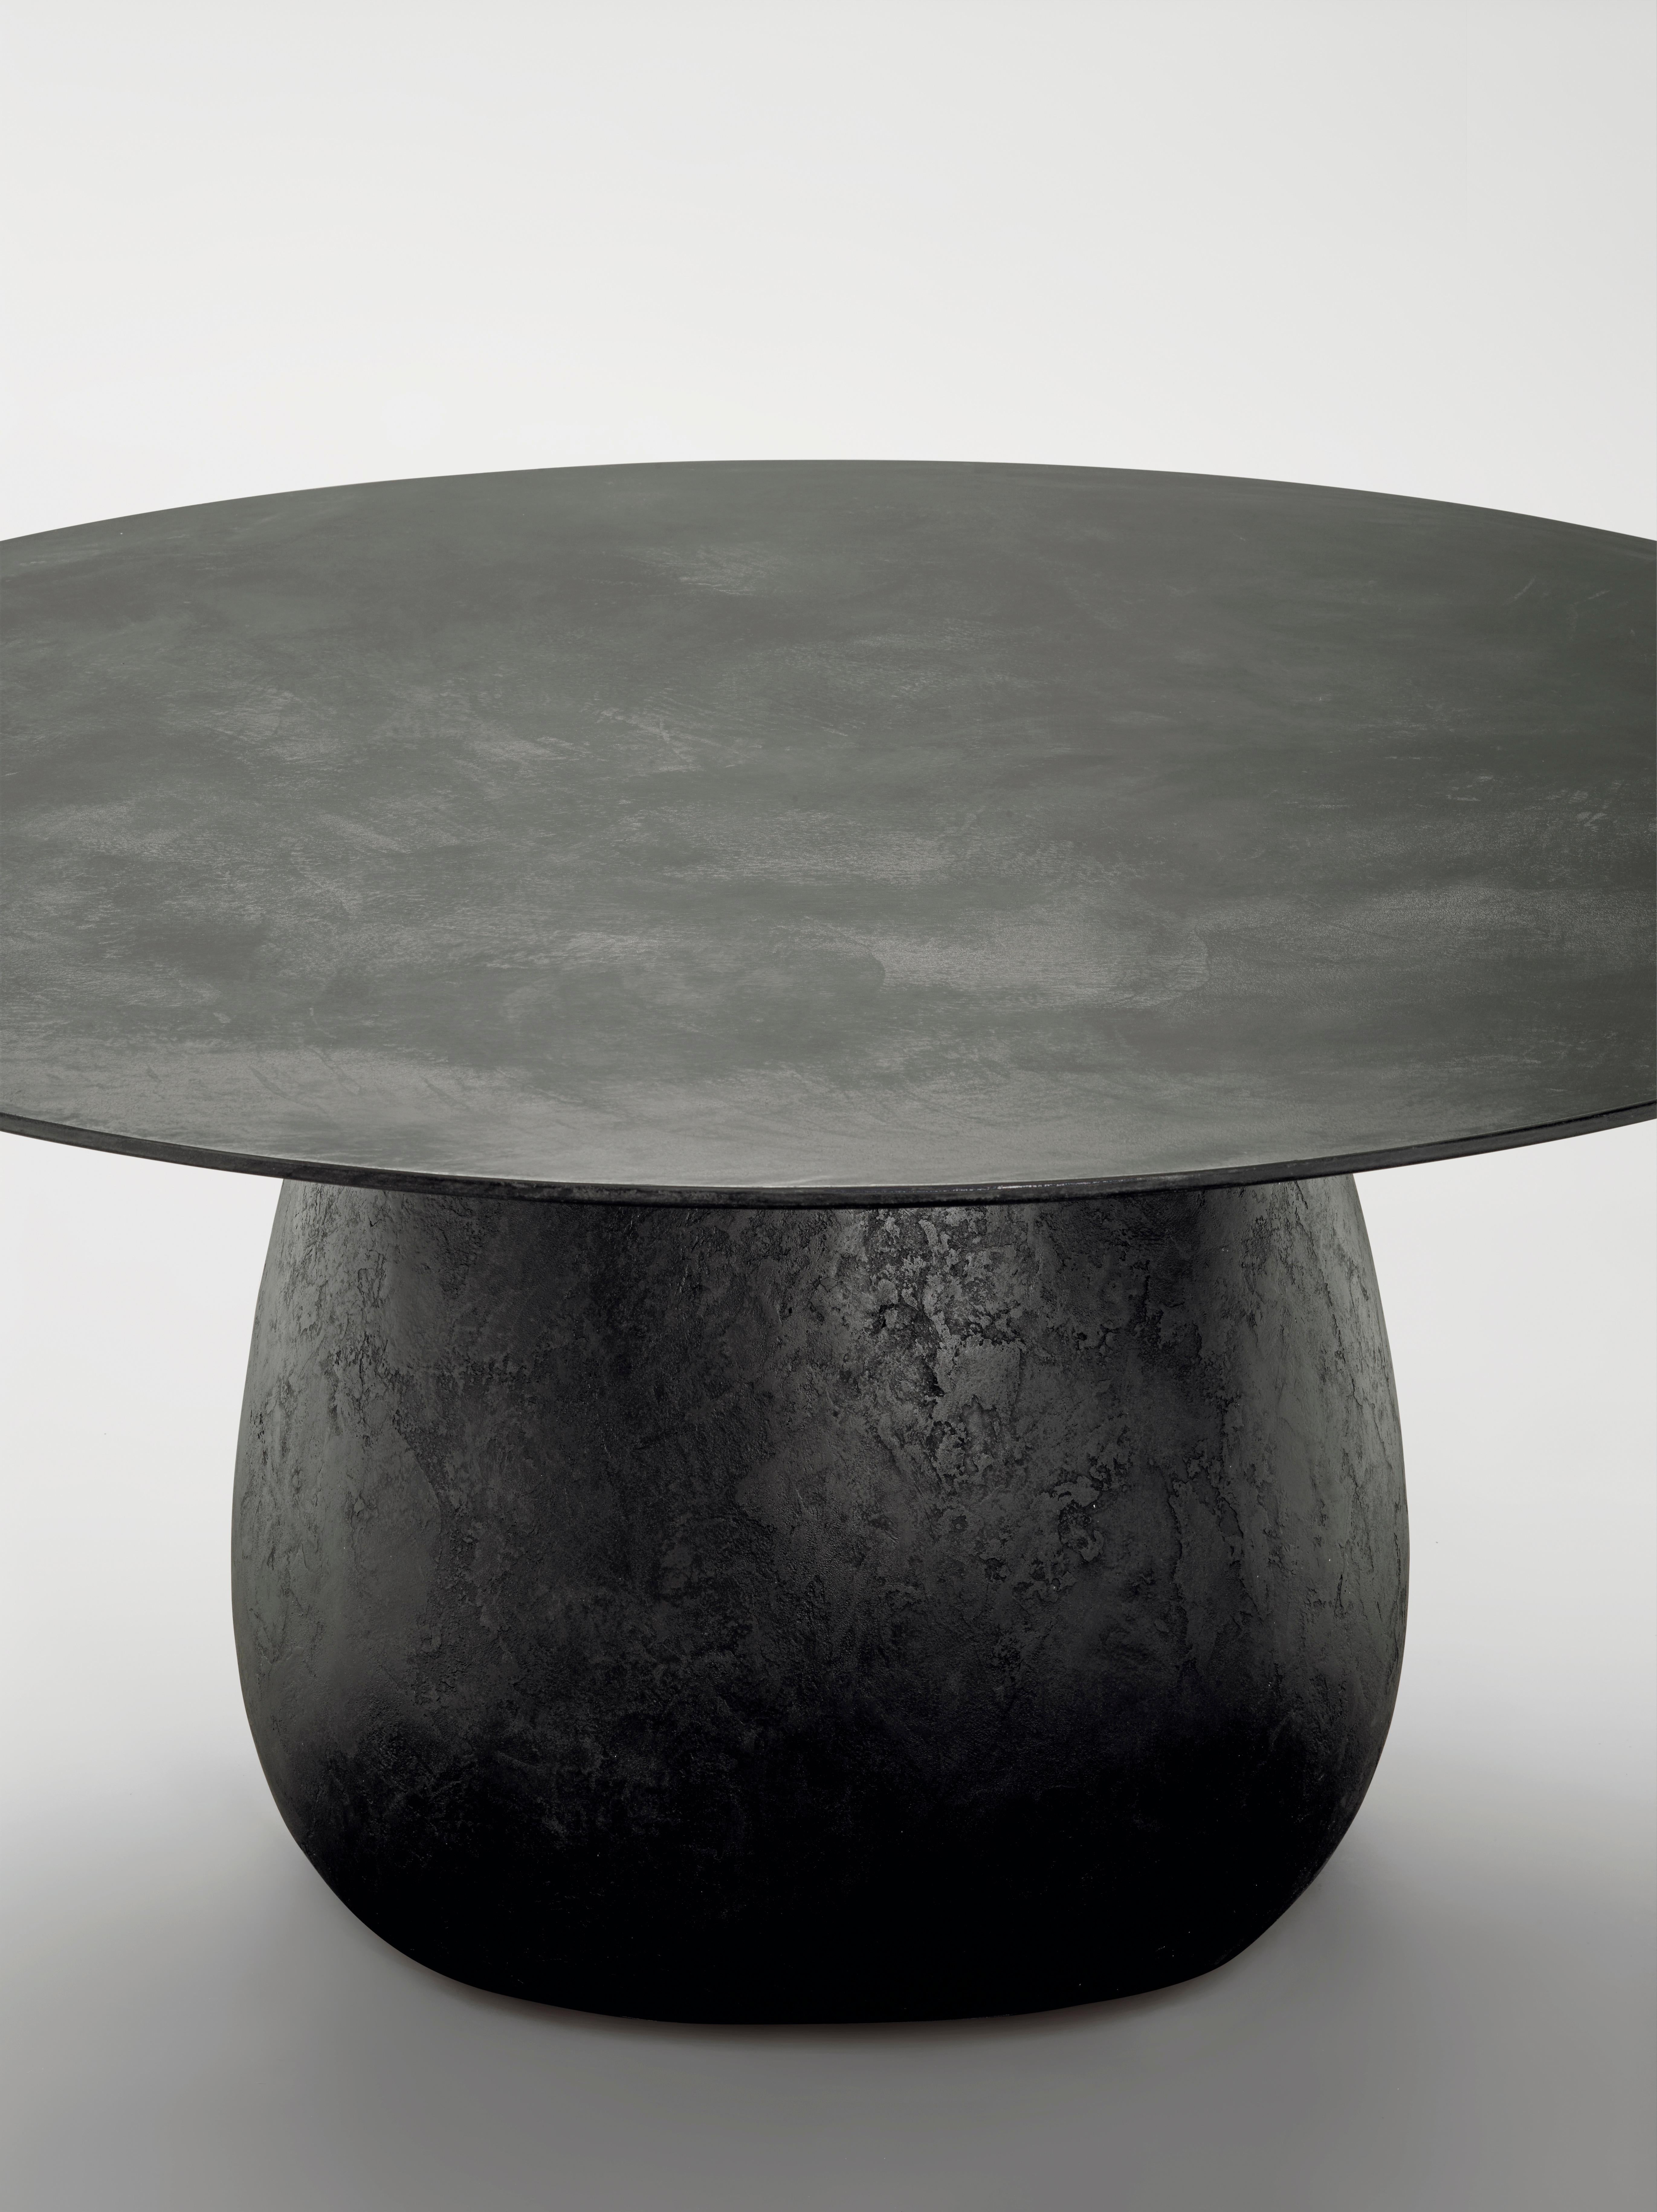 Indoor-outdoor table, moulded rigid polyurethane base with internal central leg in steel, purenit top. Base and top entirely coated with a hand-trowelled mixture of lava stone